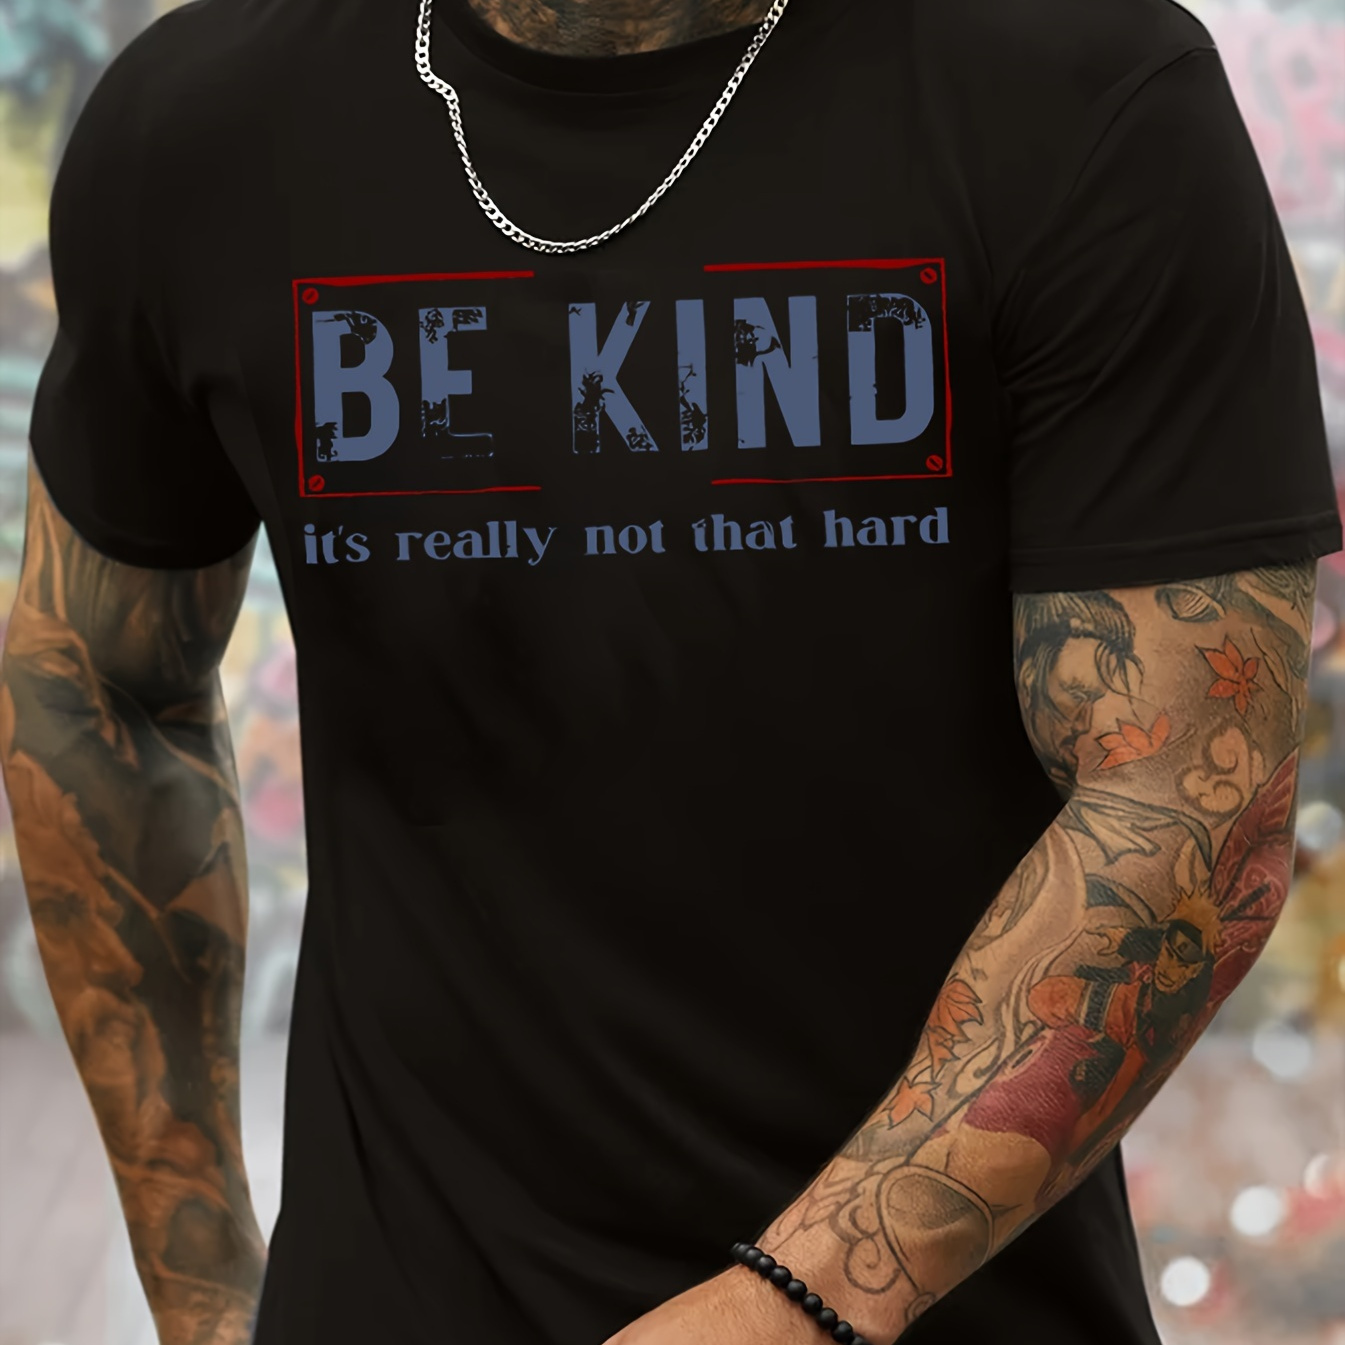 

Be Kind It's Really Not That Hard Print, Men's Novel Graphic Design T-shirt, Casual Comfy Tees For Summer, Men's Clothing Tops For Daily Activities